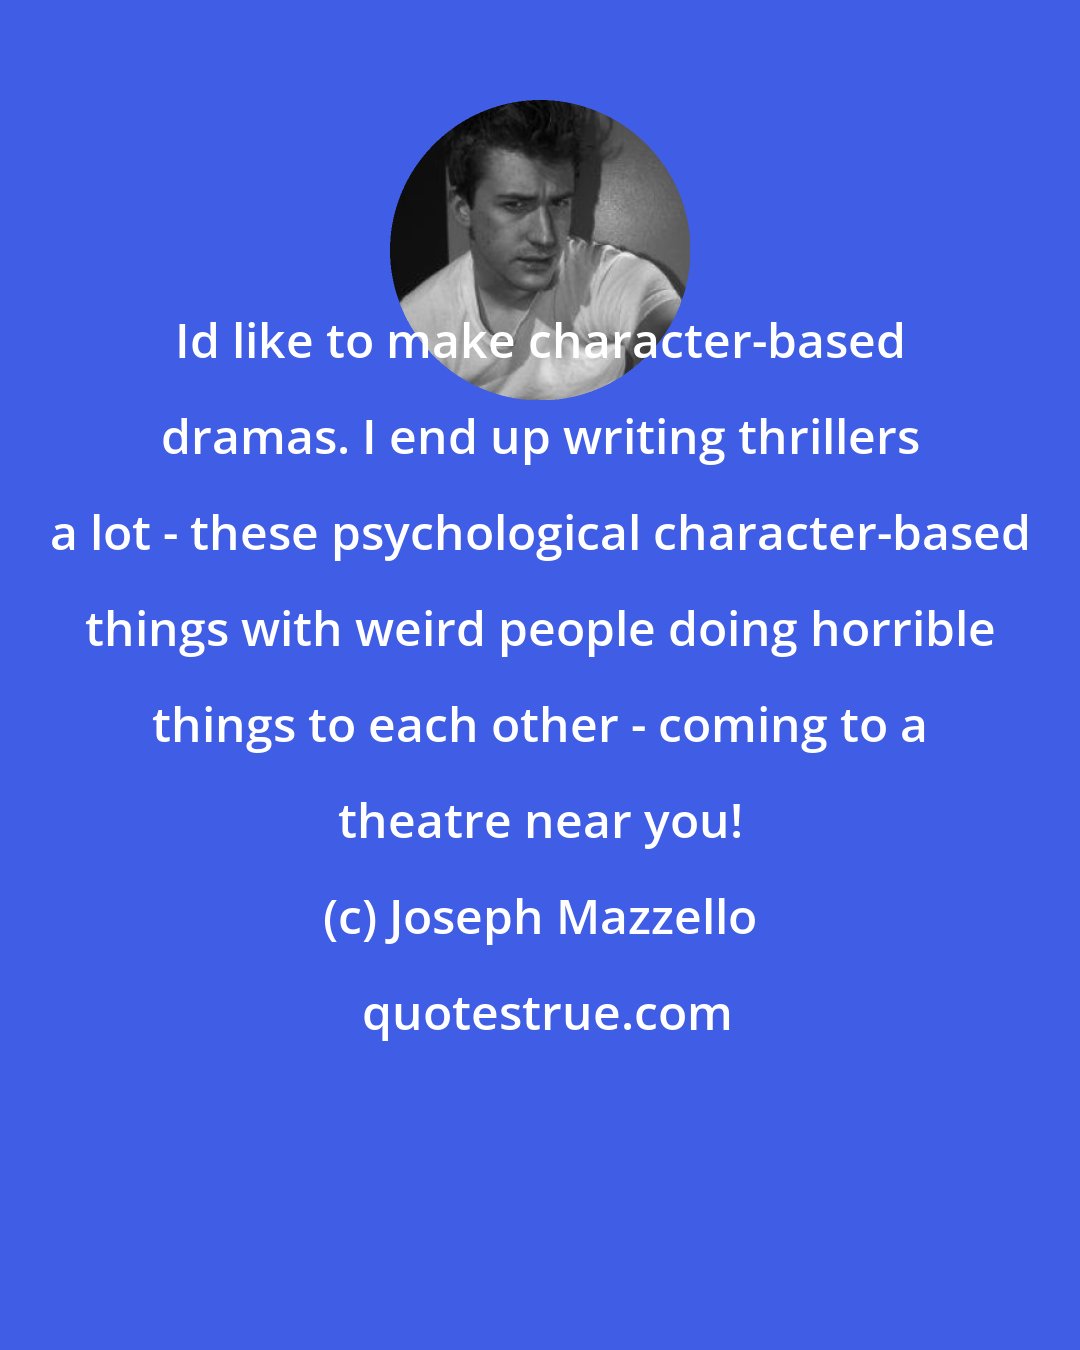 Joseph Mazzello: Id like to make character-based dramas. I end up writing thrillers a lot - these psychological character-based things with weird people doing horrible things to each other - coming to a theatre near you!